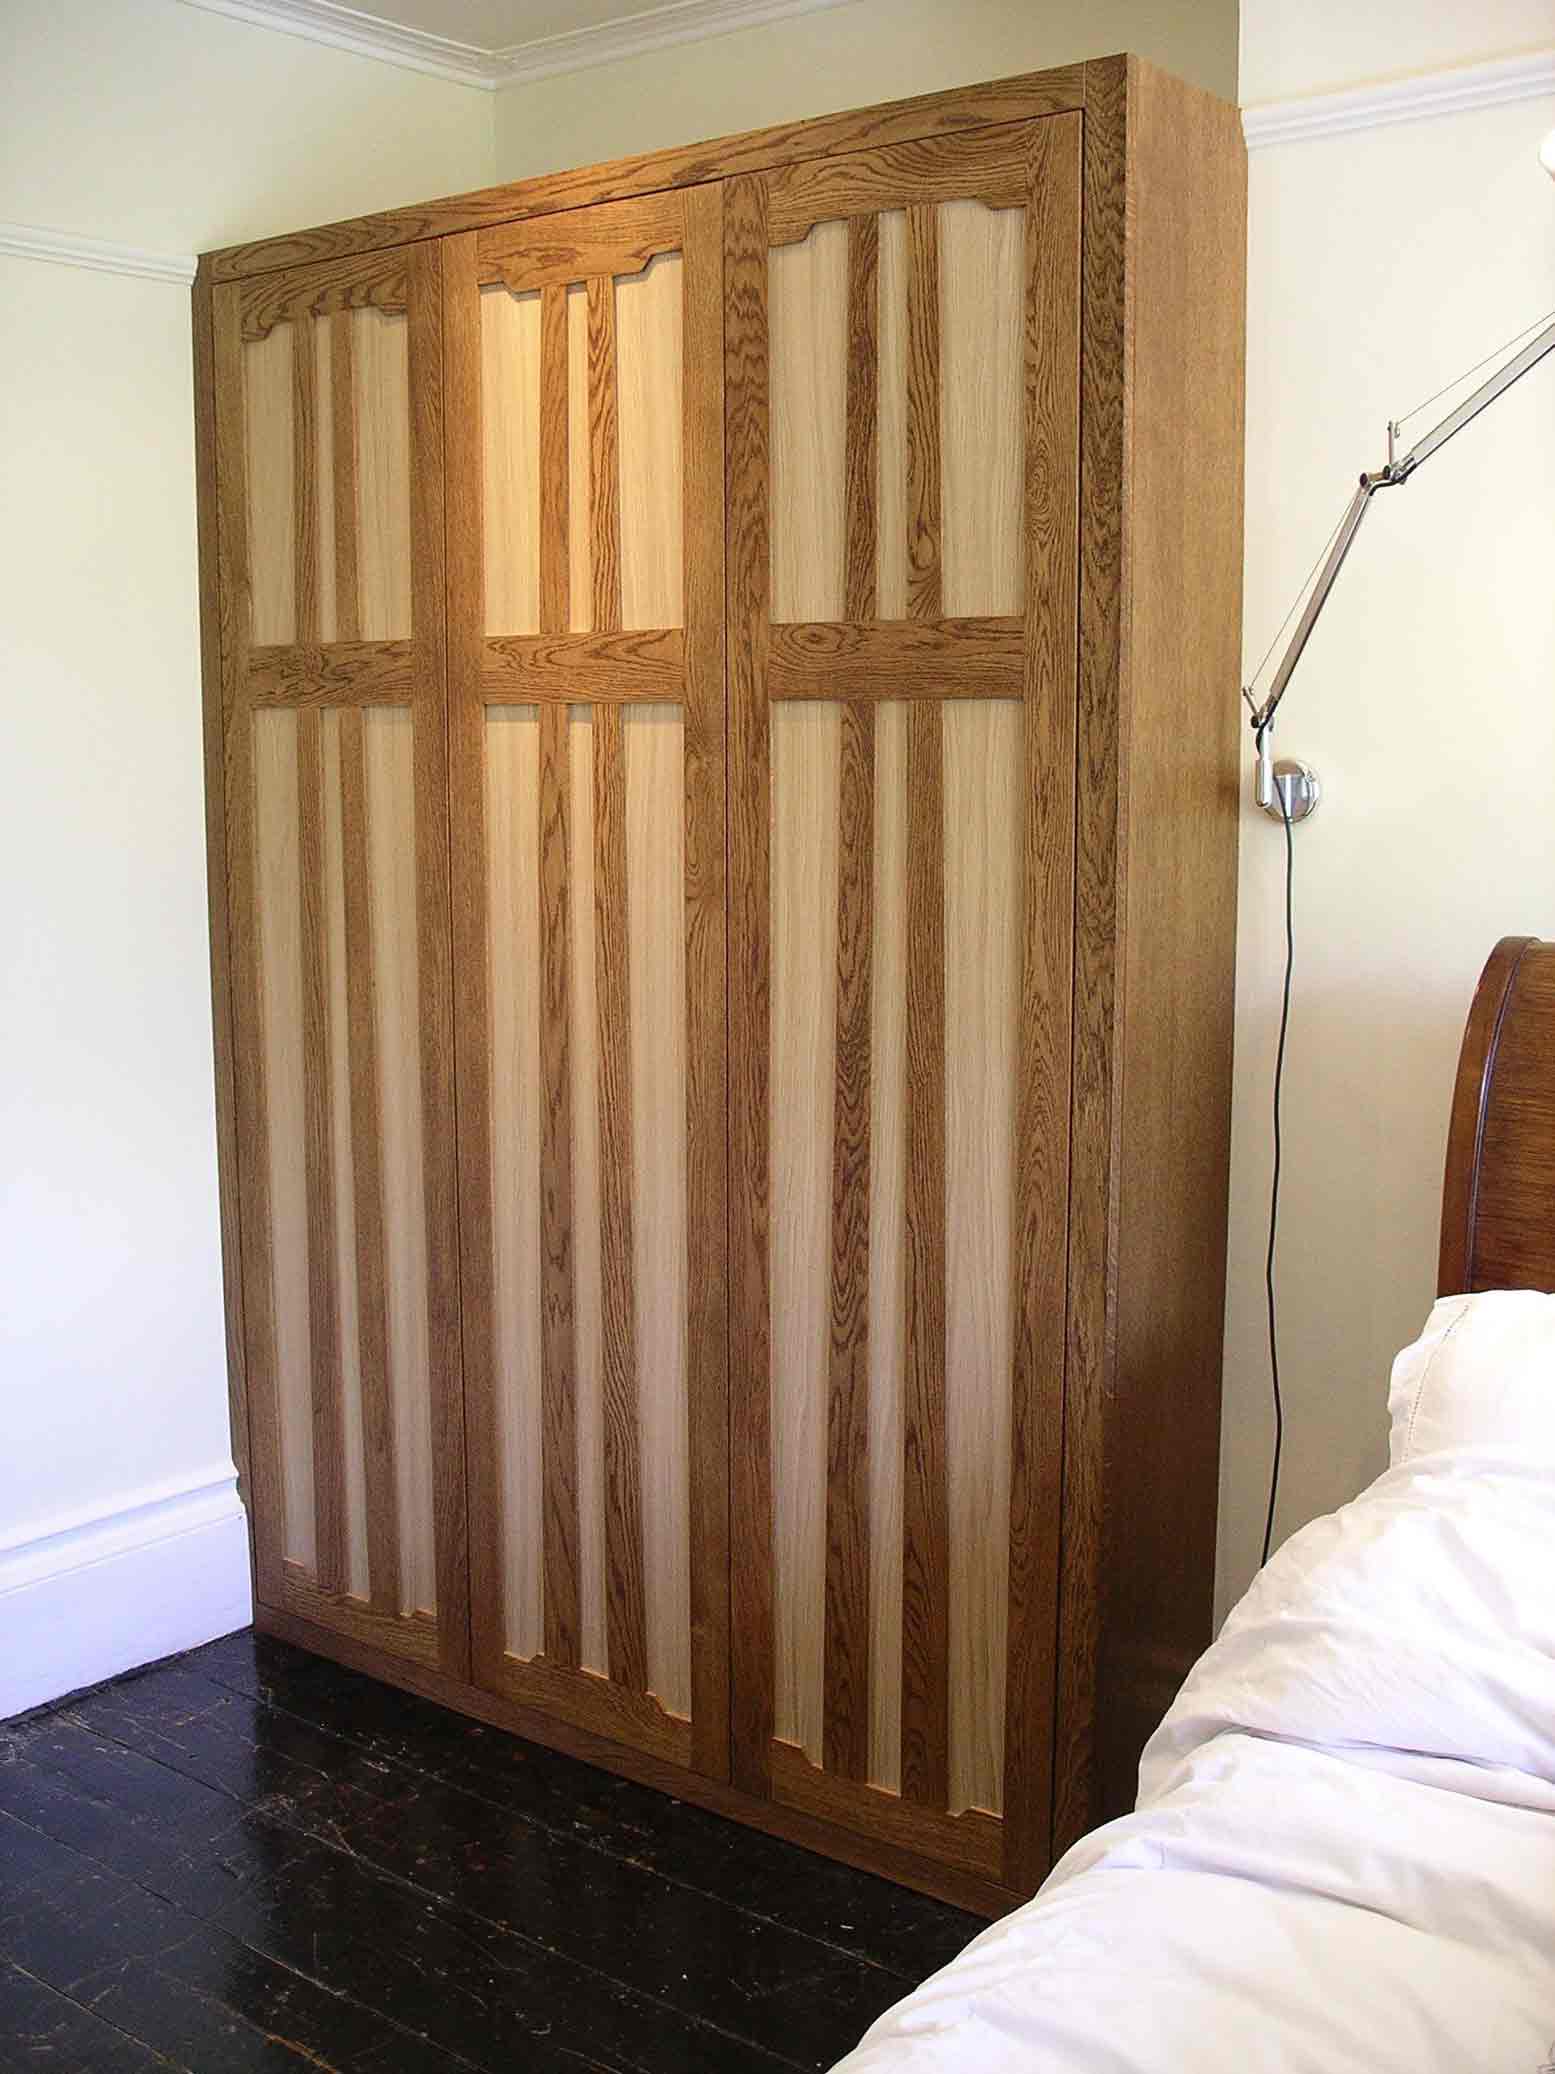 Arts And Crafts Wardrobe By Peter Henderson Furniture Brighton Uk